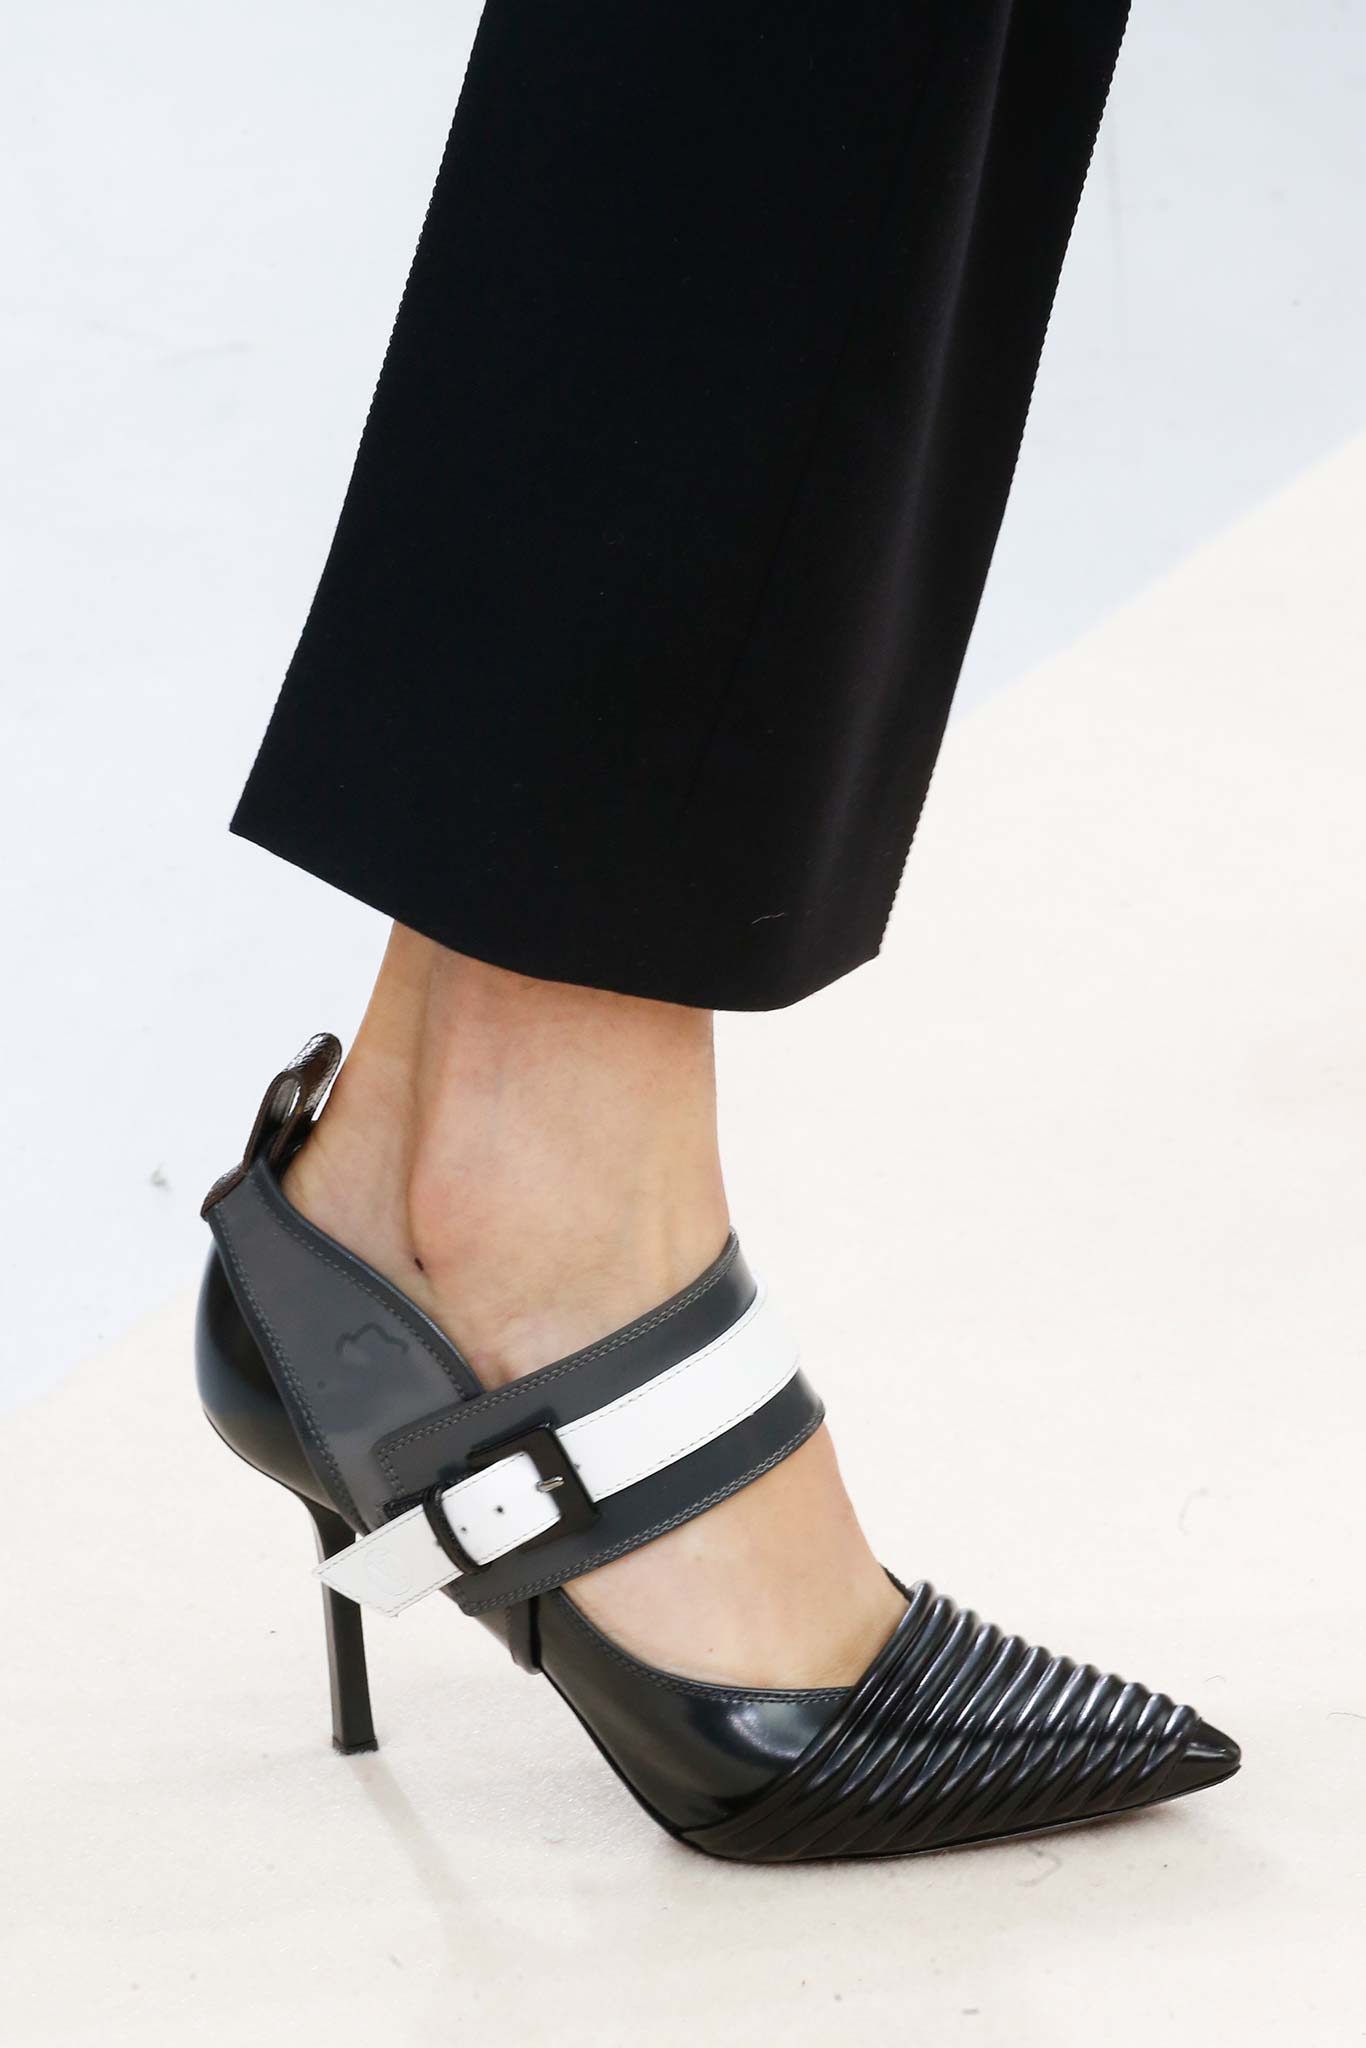 The 10 Most Memorable Shoes from Paris Fashion Week - Footwear Plus ...